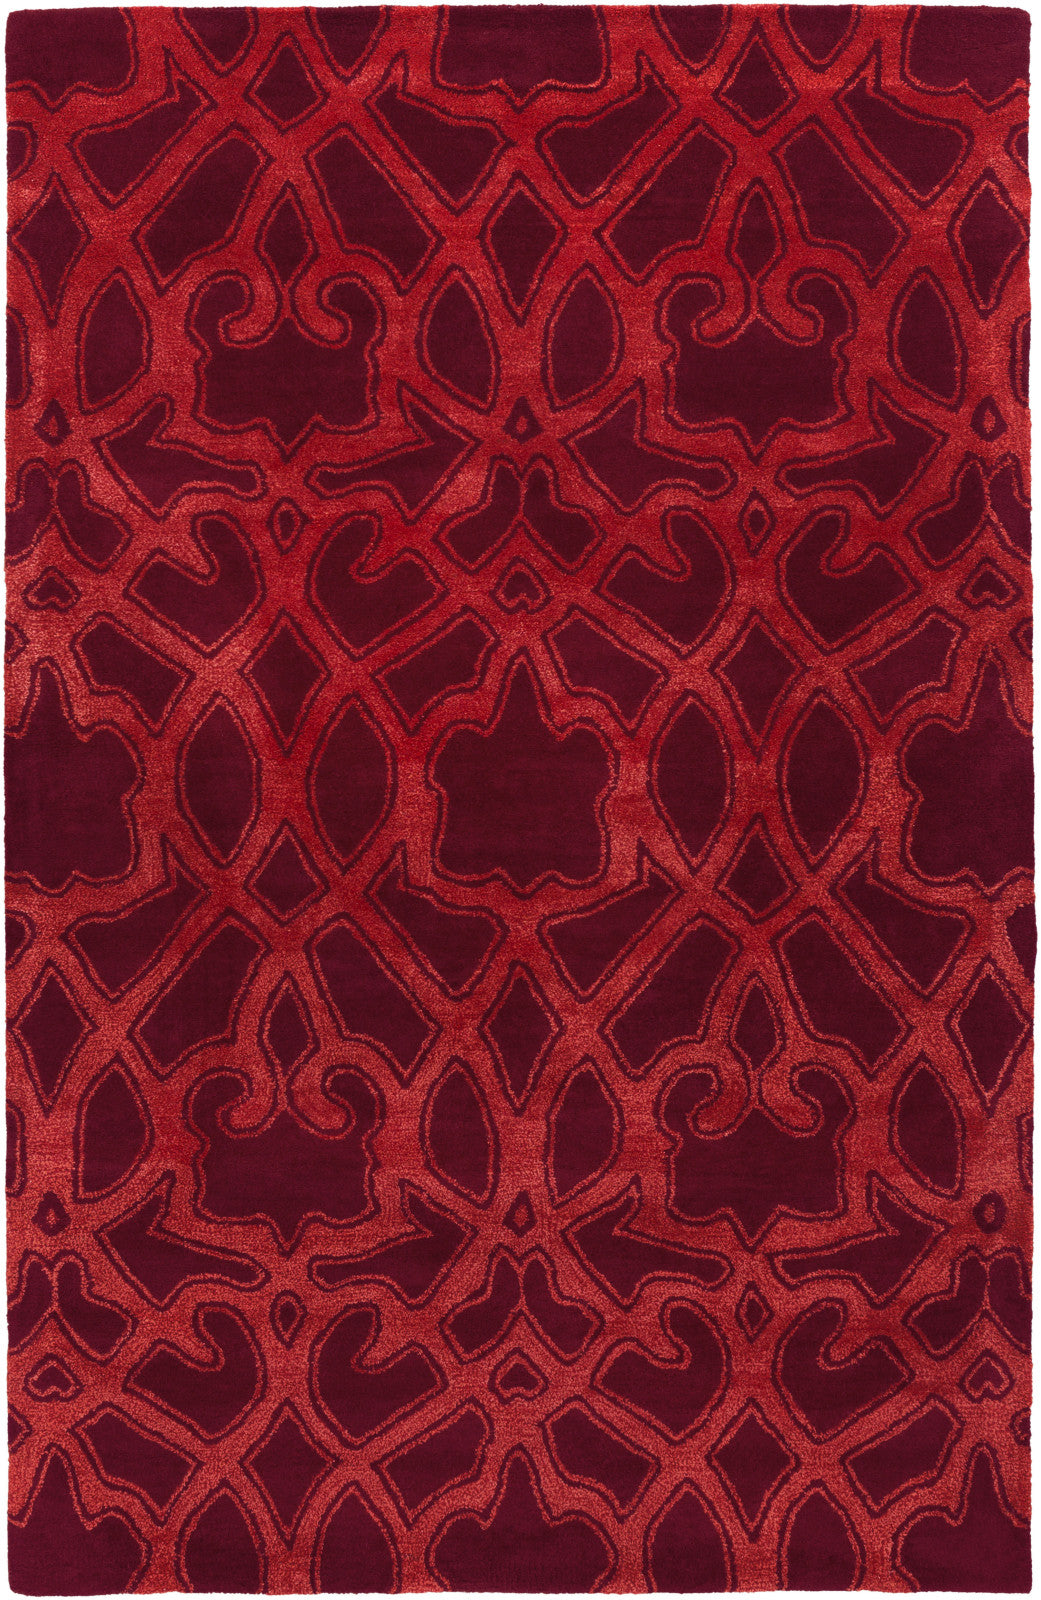 Surya Mount Perry MTP-1007 Area Rug by Florence Broadhurst